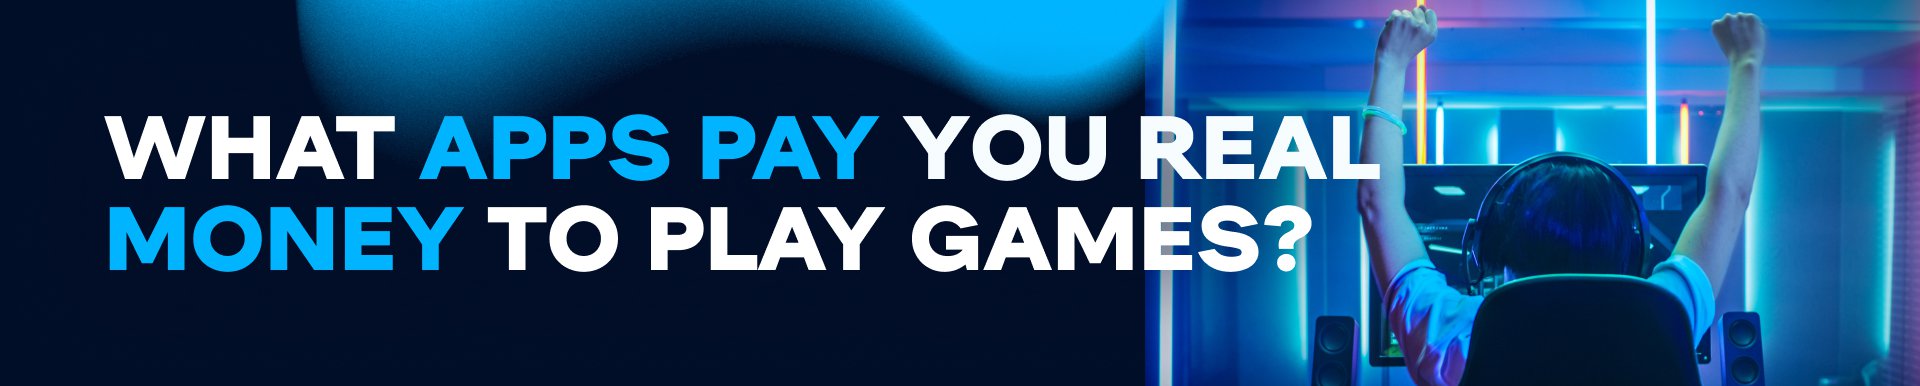 What apps pay you real money to play games?